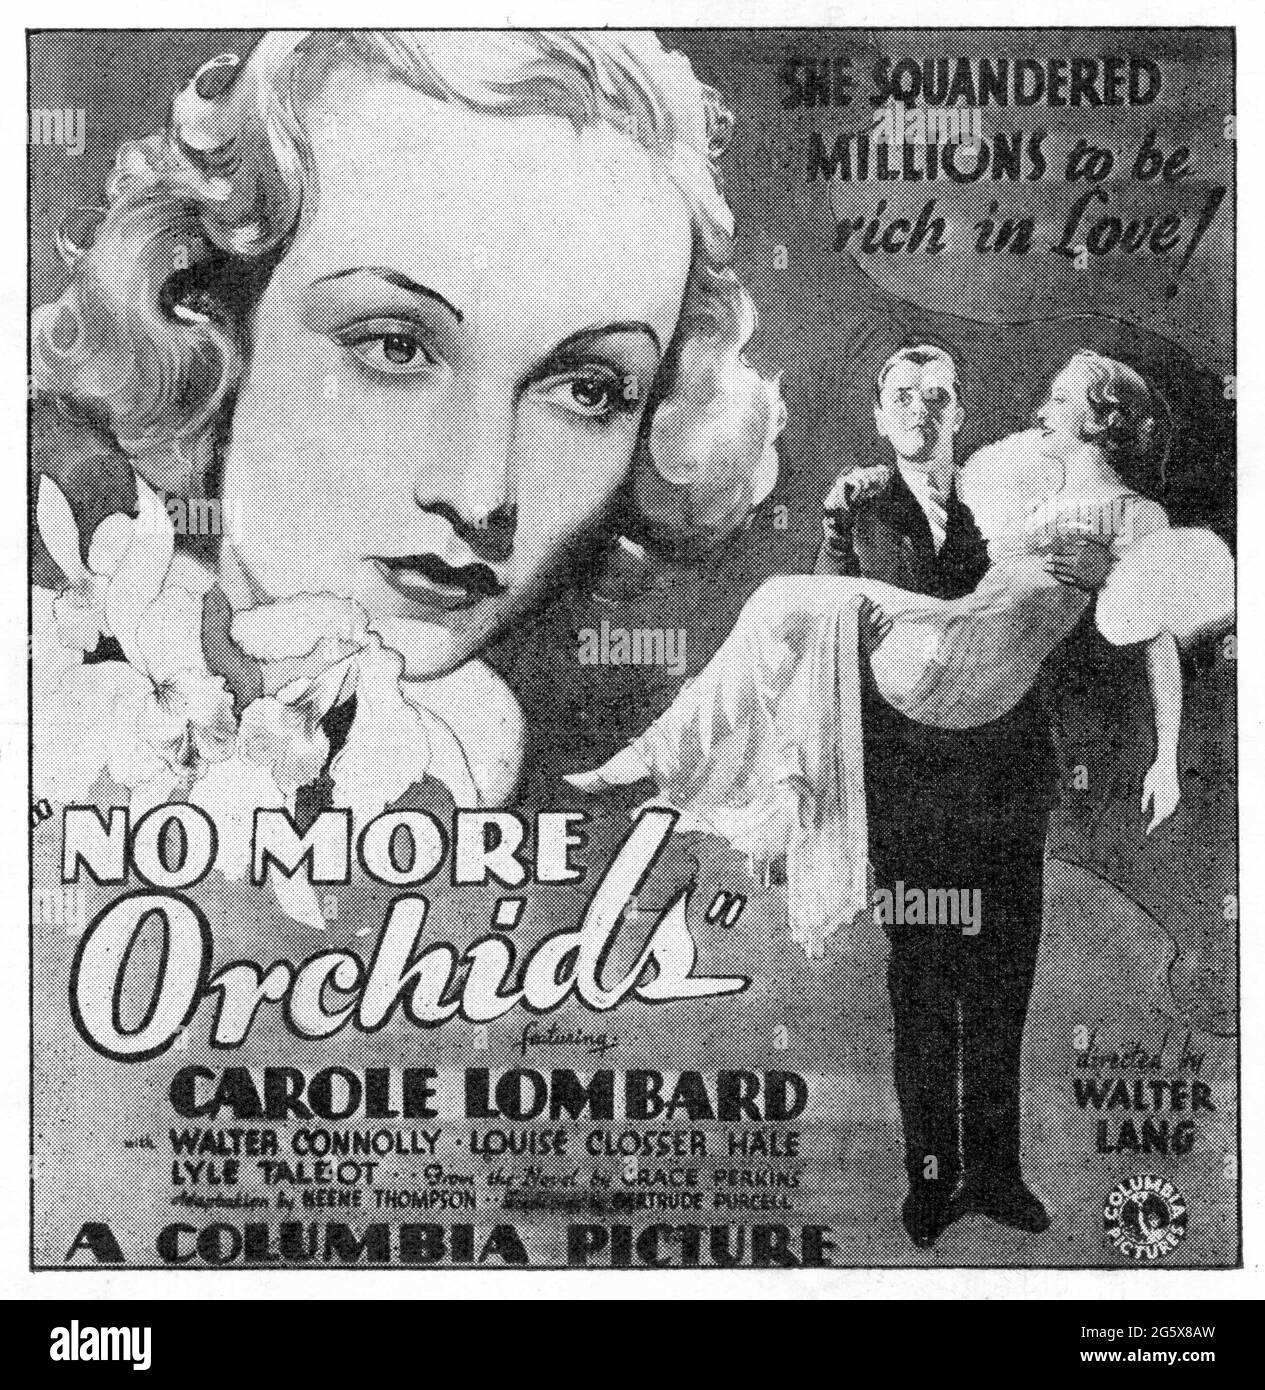 CAROLE LOMBARD and LYLE TALBOT in NO MORE ORCHIDS 1932 director WALTER LANG story Grace Perkins adaptation Keene Thompson screenplay Gertrude Purcell cinematography Joseph H. August costume design Robert Kalloch Columbia Pictures Stock Photo